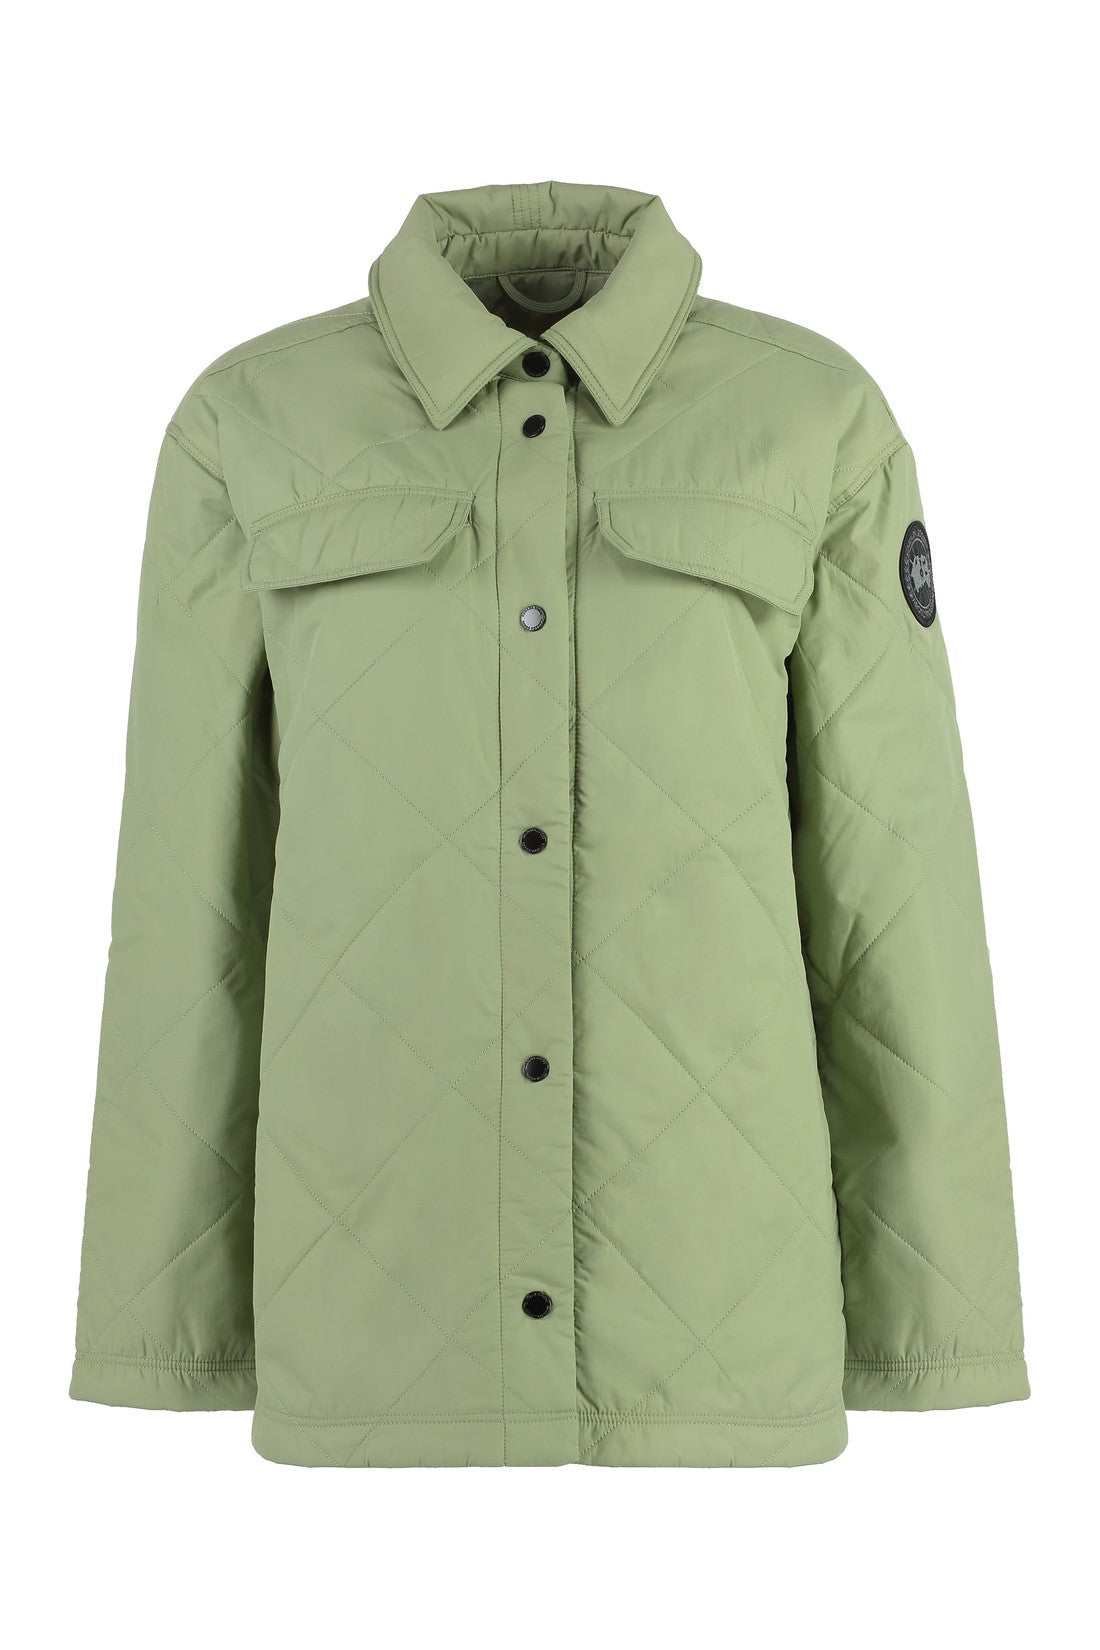 Canada Goose-OUTLET-SALE-Albany Nylon overshirt-ARCHIVIST